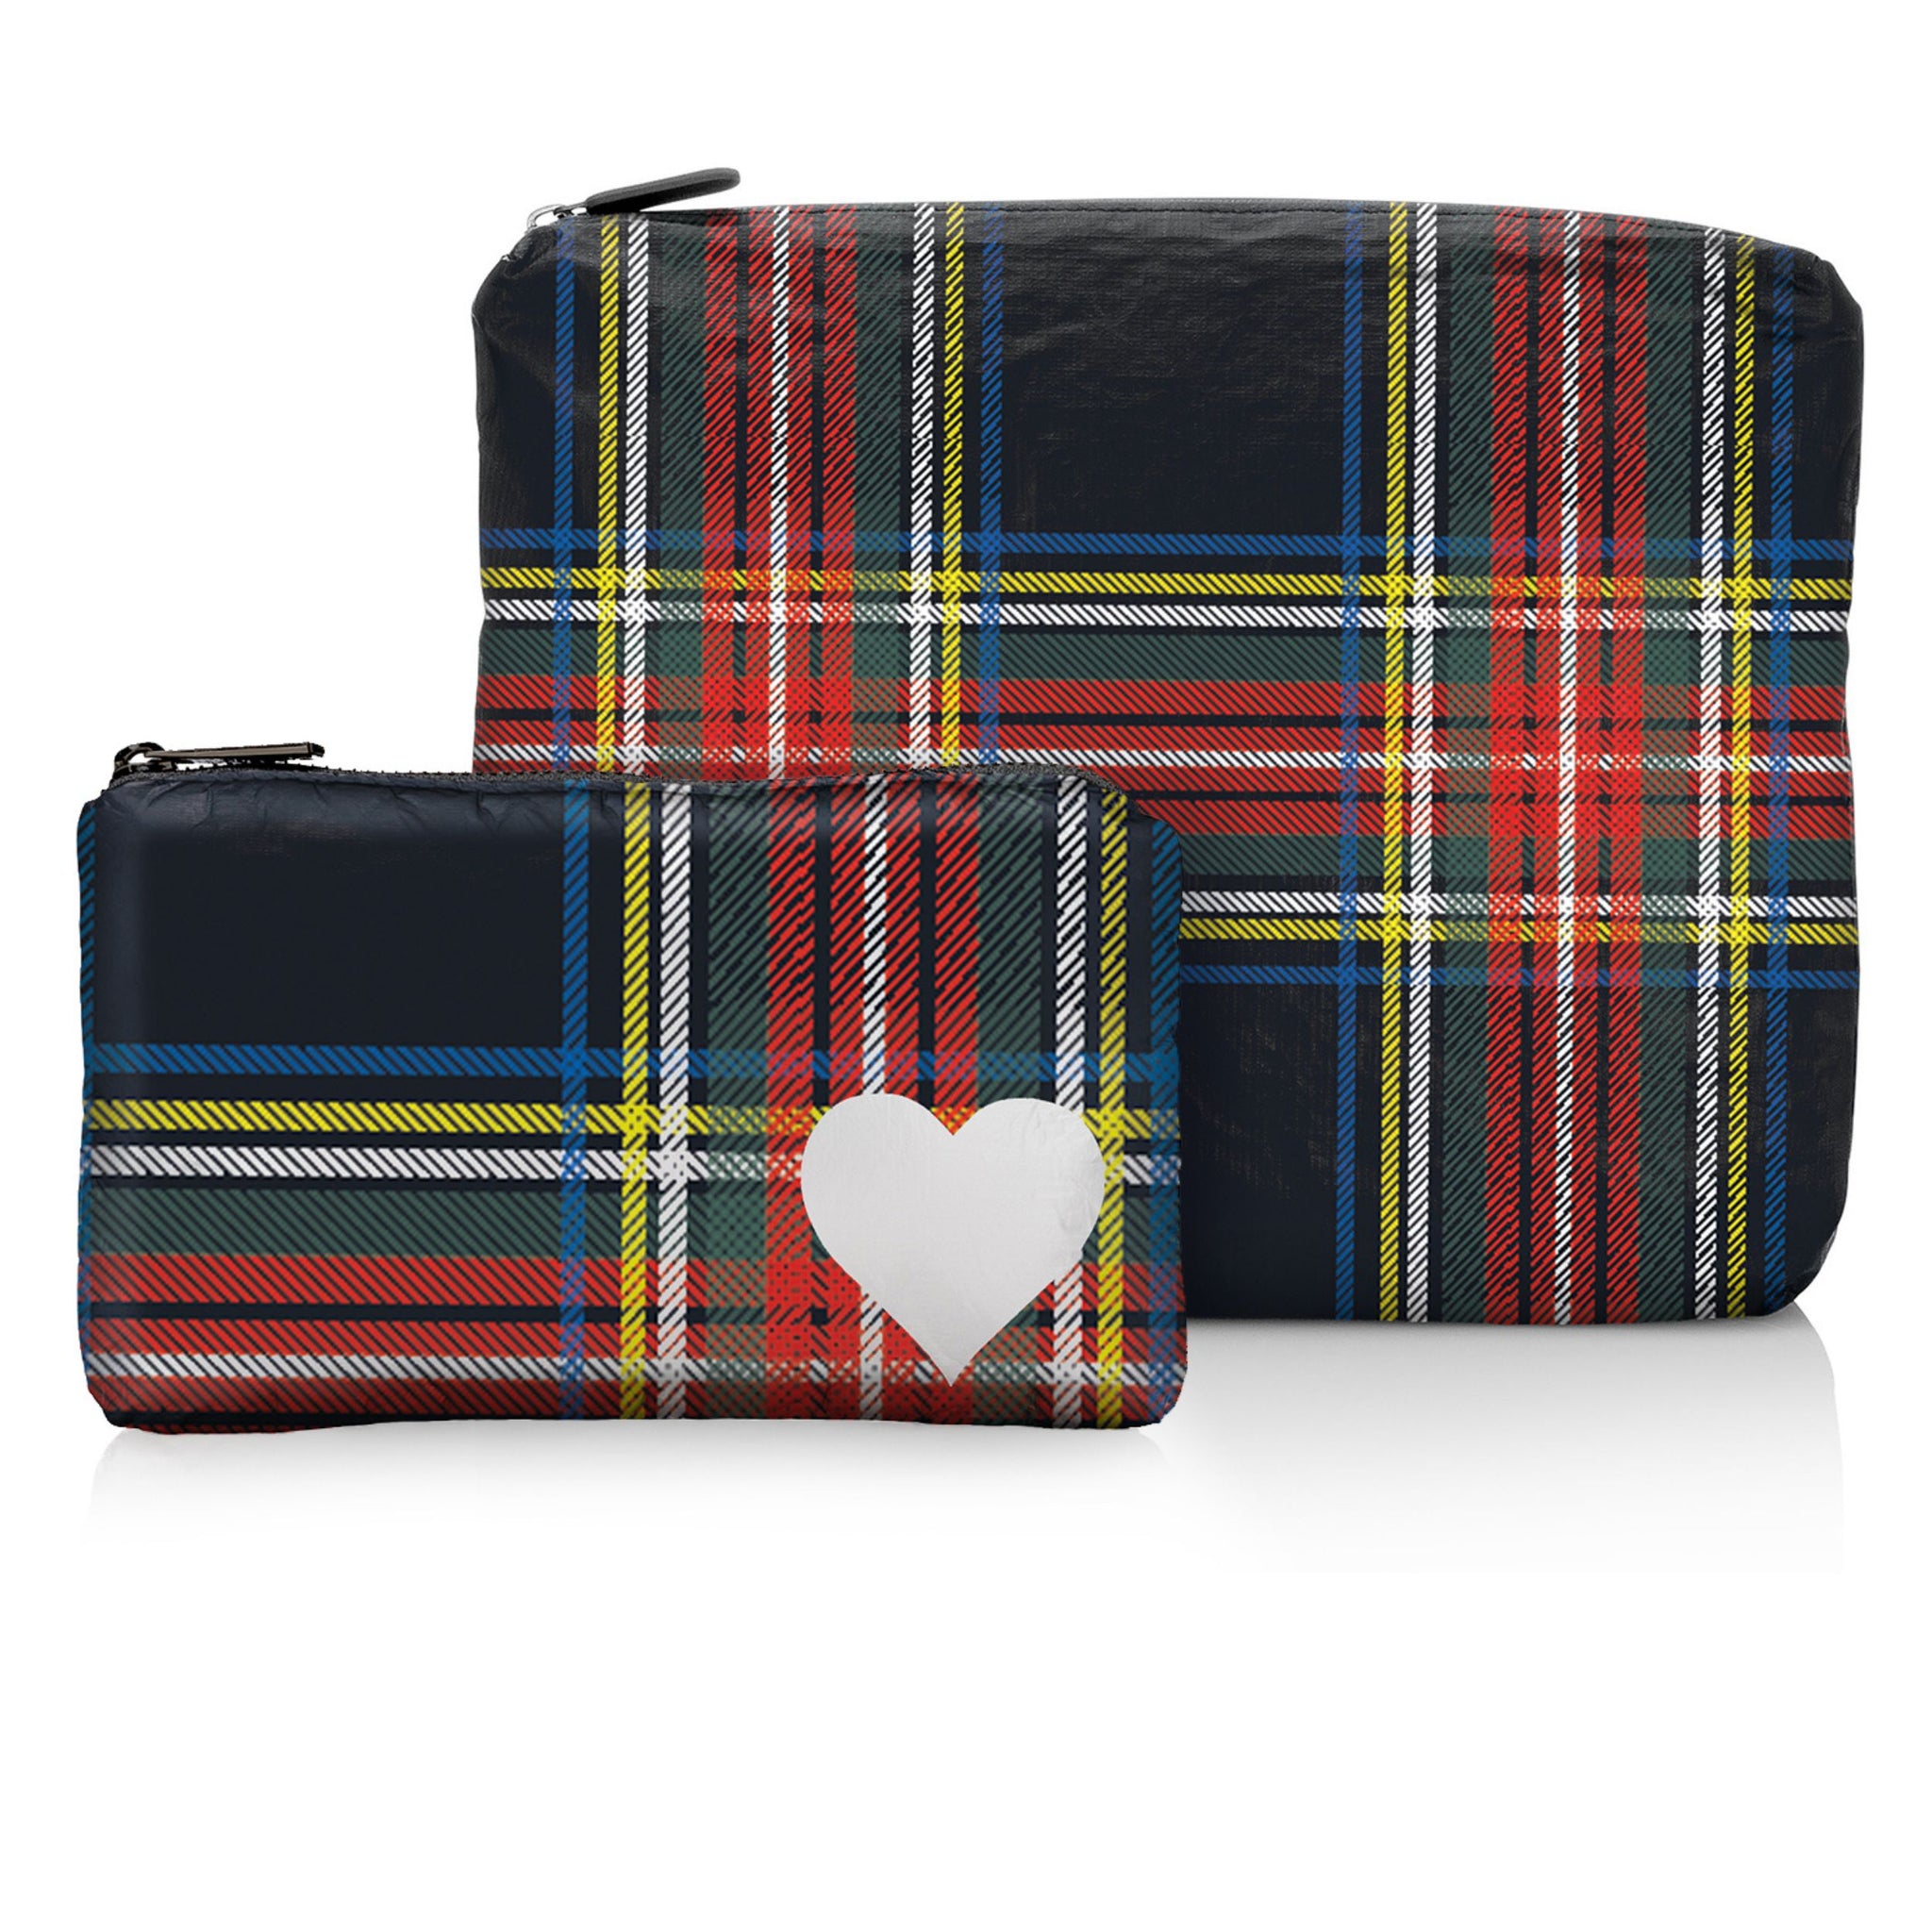 Set of two organizational packs in holiday plaid pattern